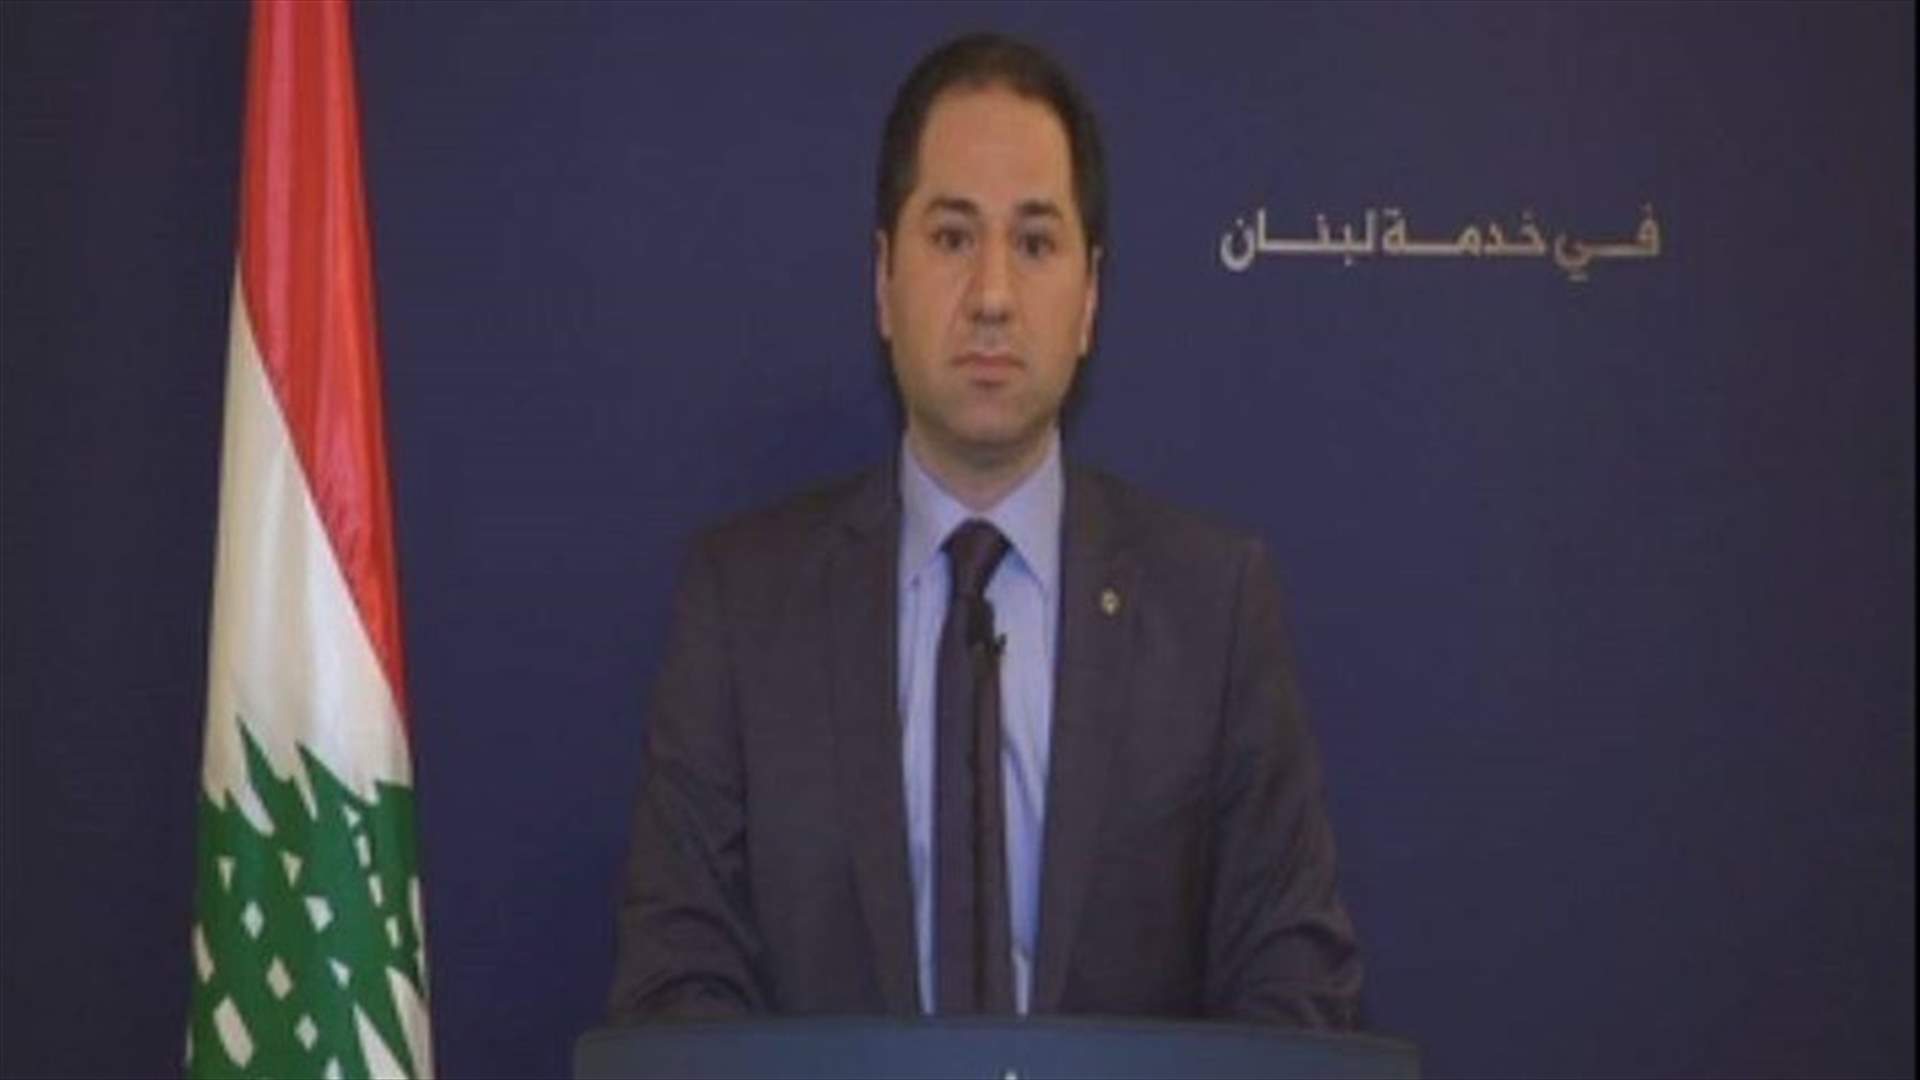 MP Gemayel to Minister Khatib: Go search for the 940 other landfills